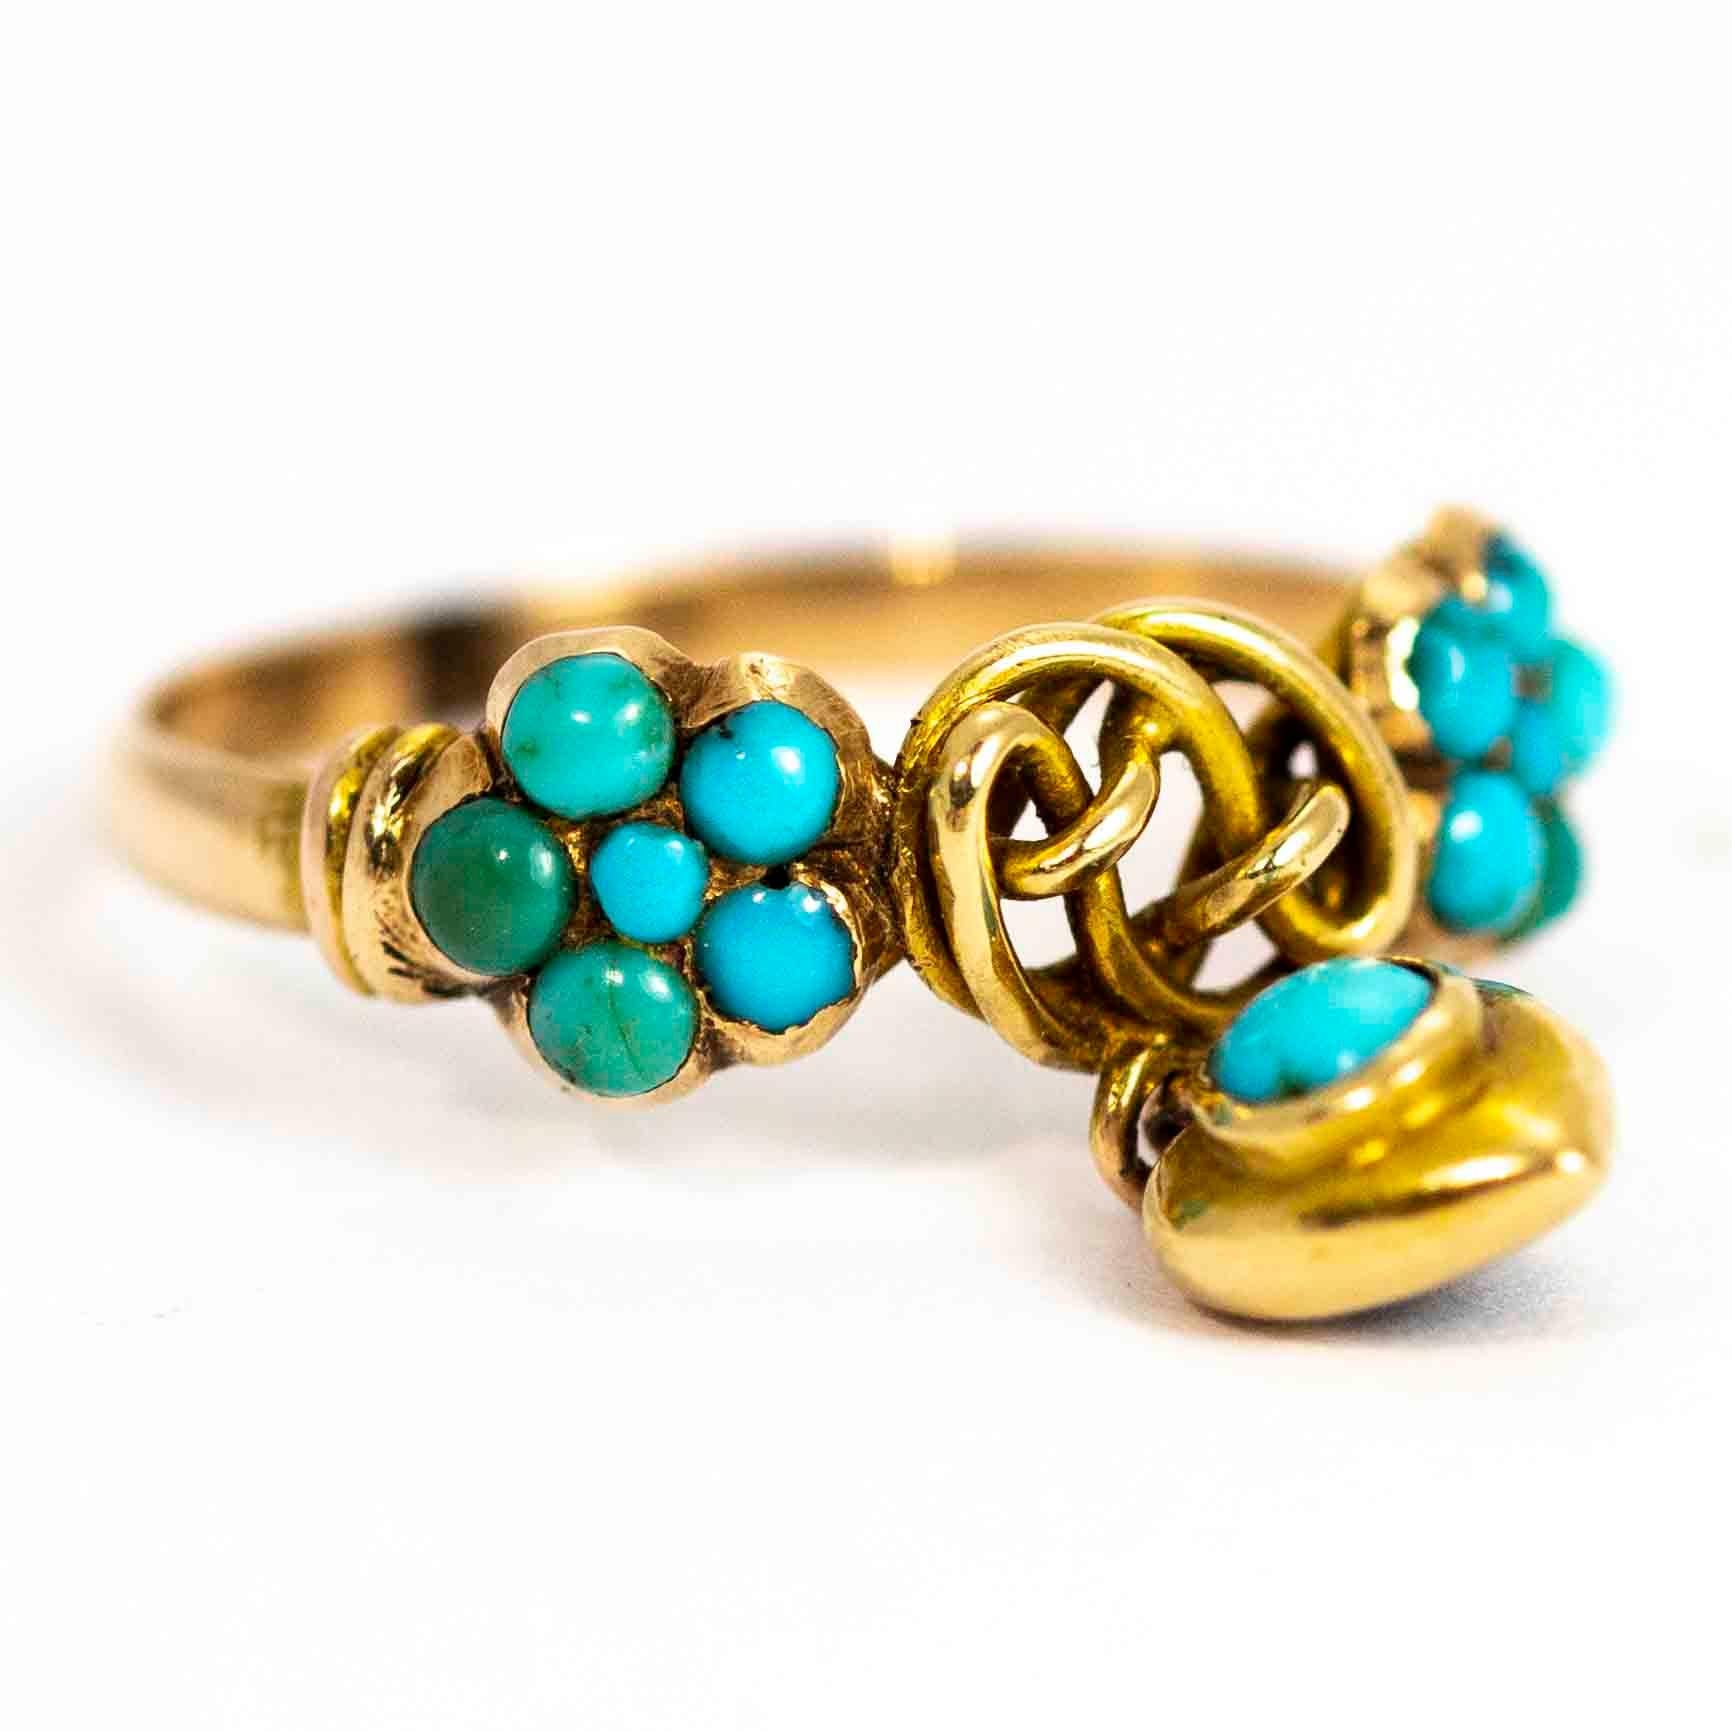 Vintage 15 Carat Gold Turquoise Lover's Knot Ring 1